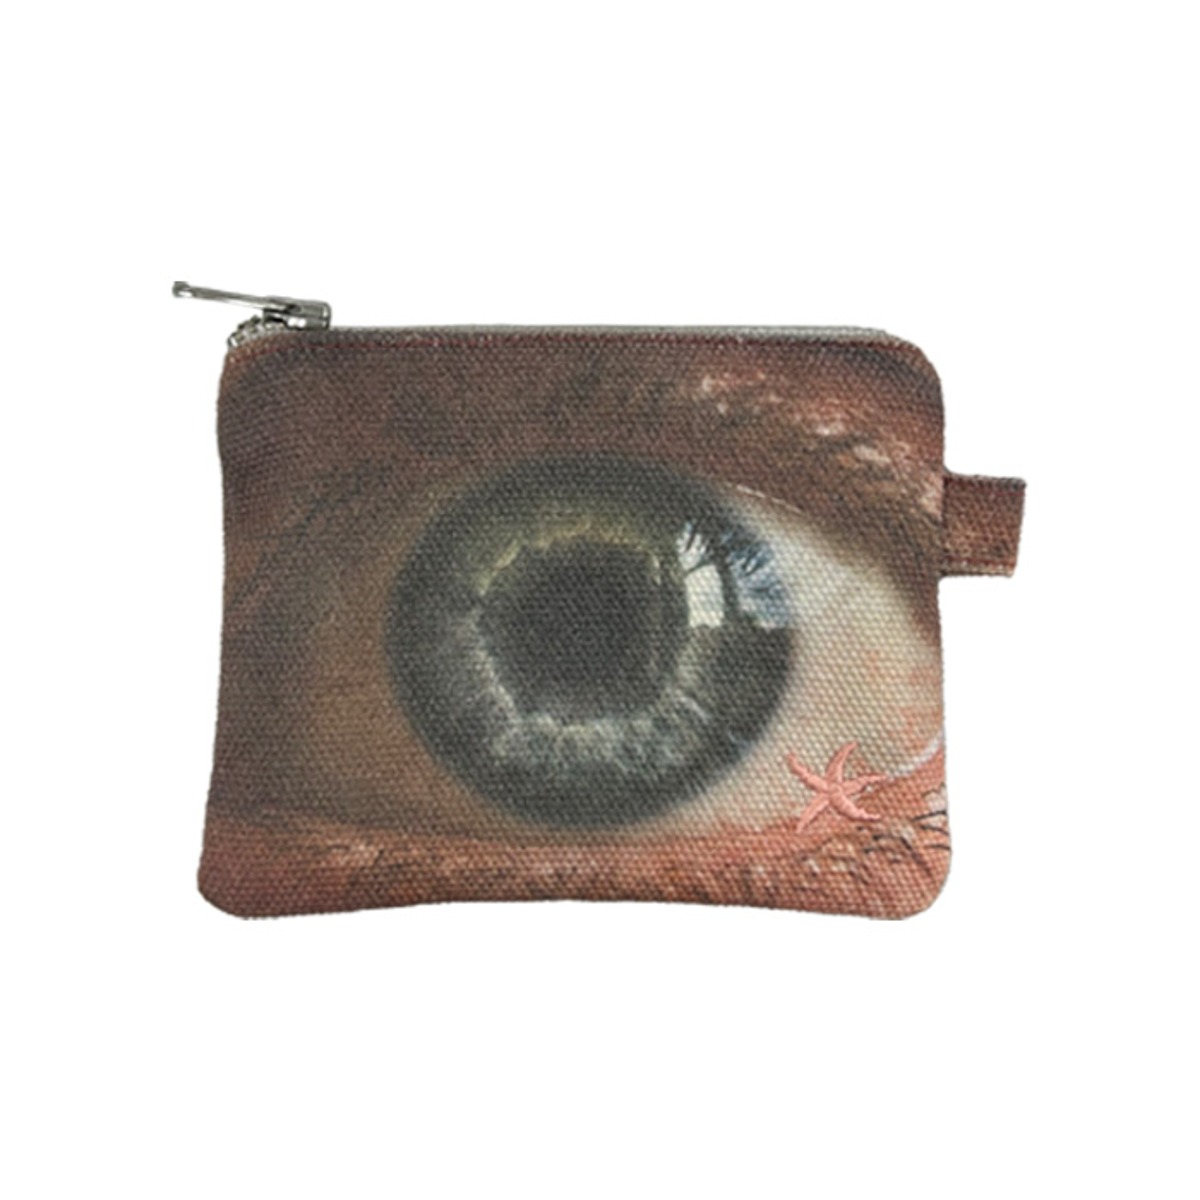 TCM eyes coin pouch (ivory)